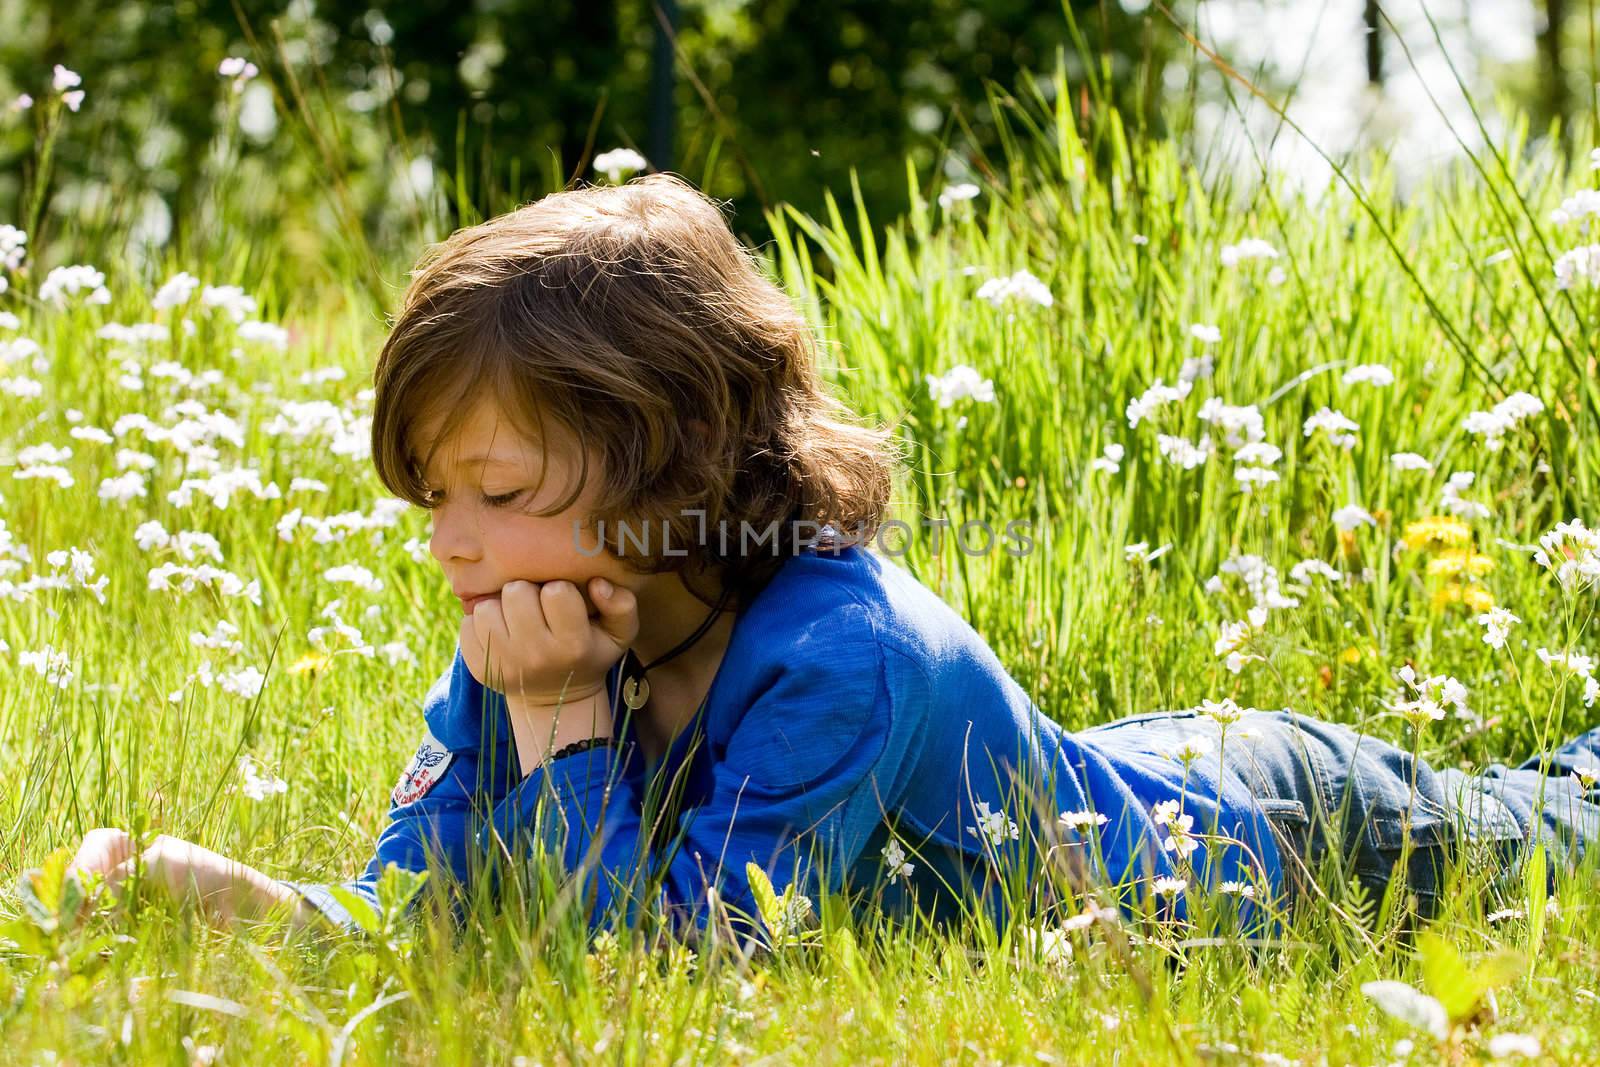 Young boy is thinking in the grass